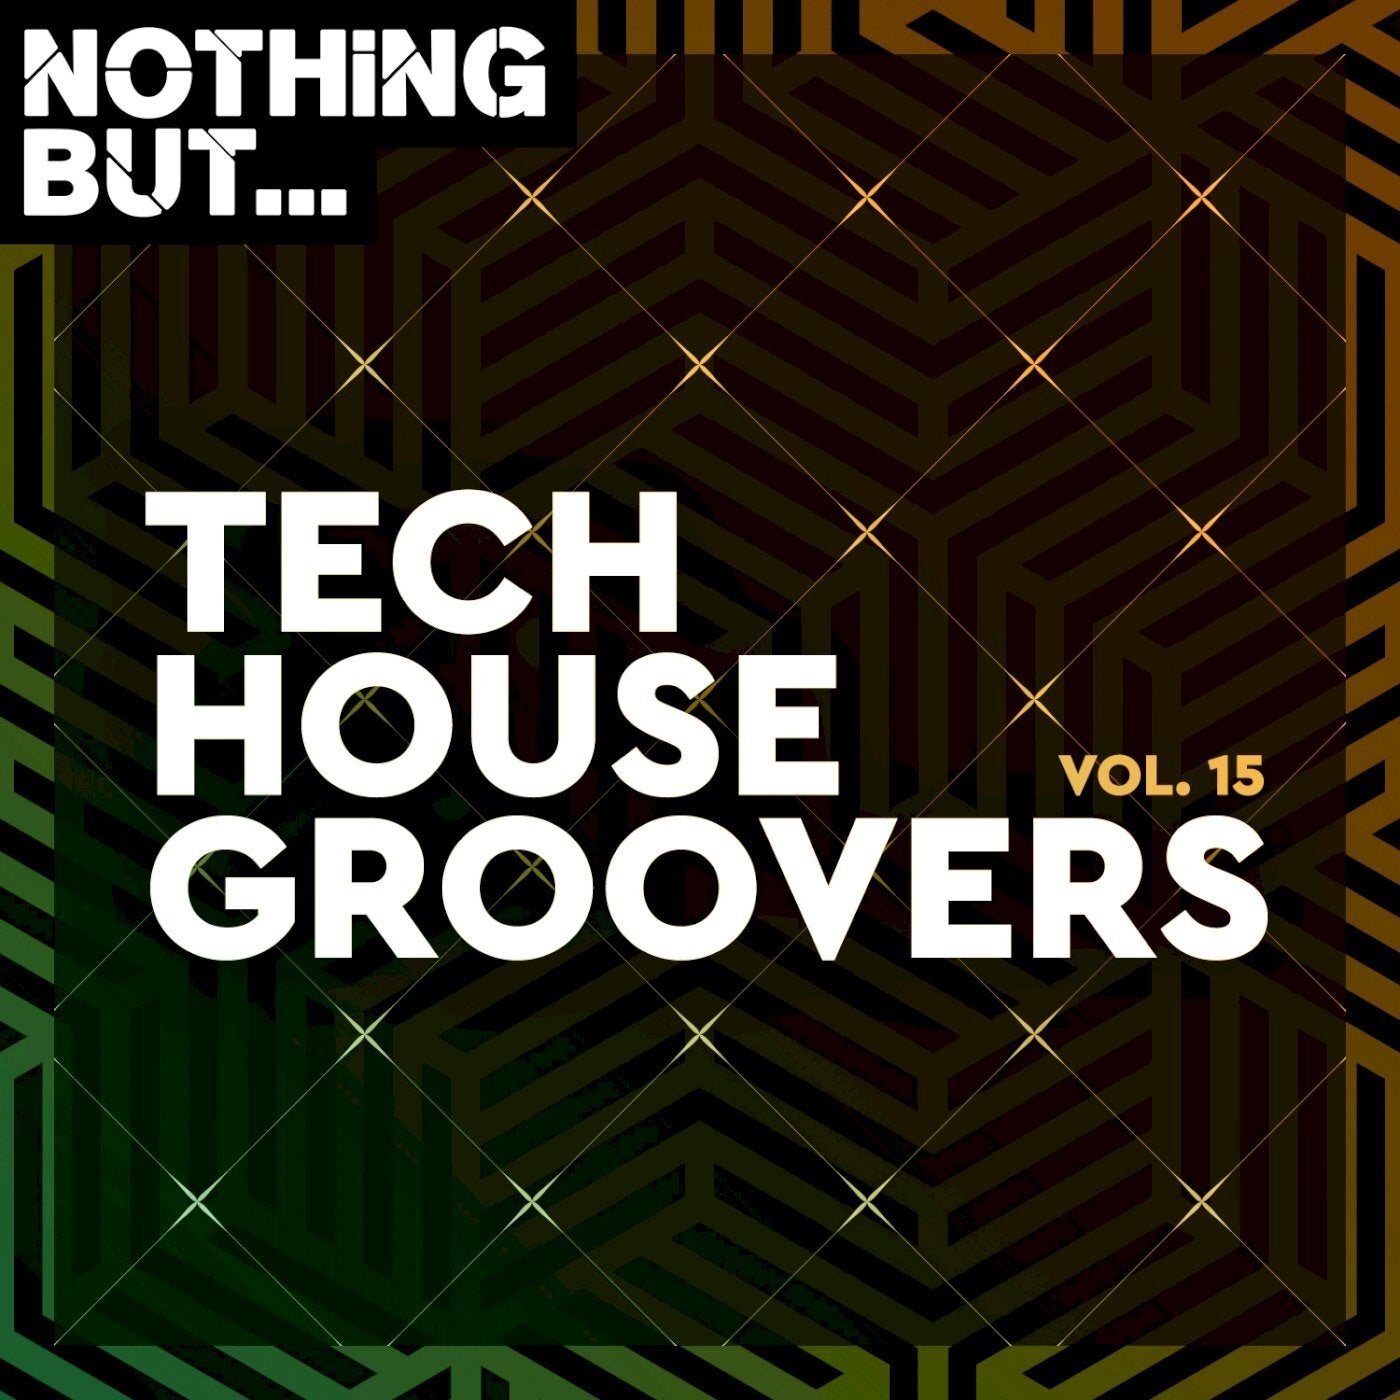 VA – Nothing But… Tech House Groovers, Vol. 15 [NBTHG15]